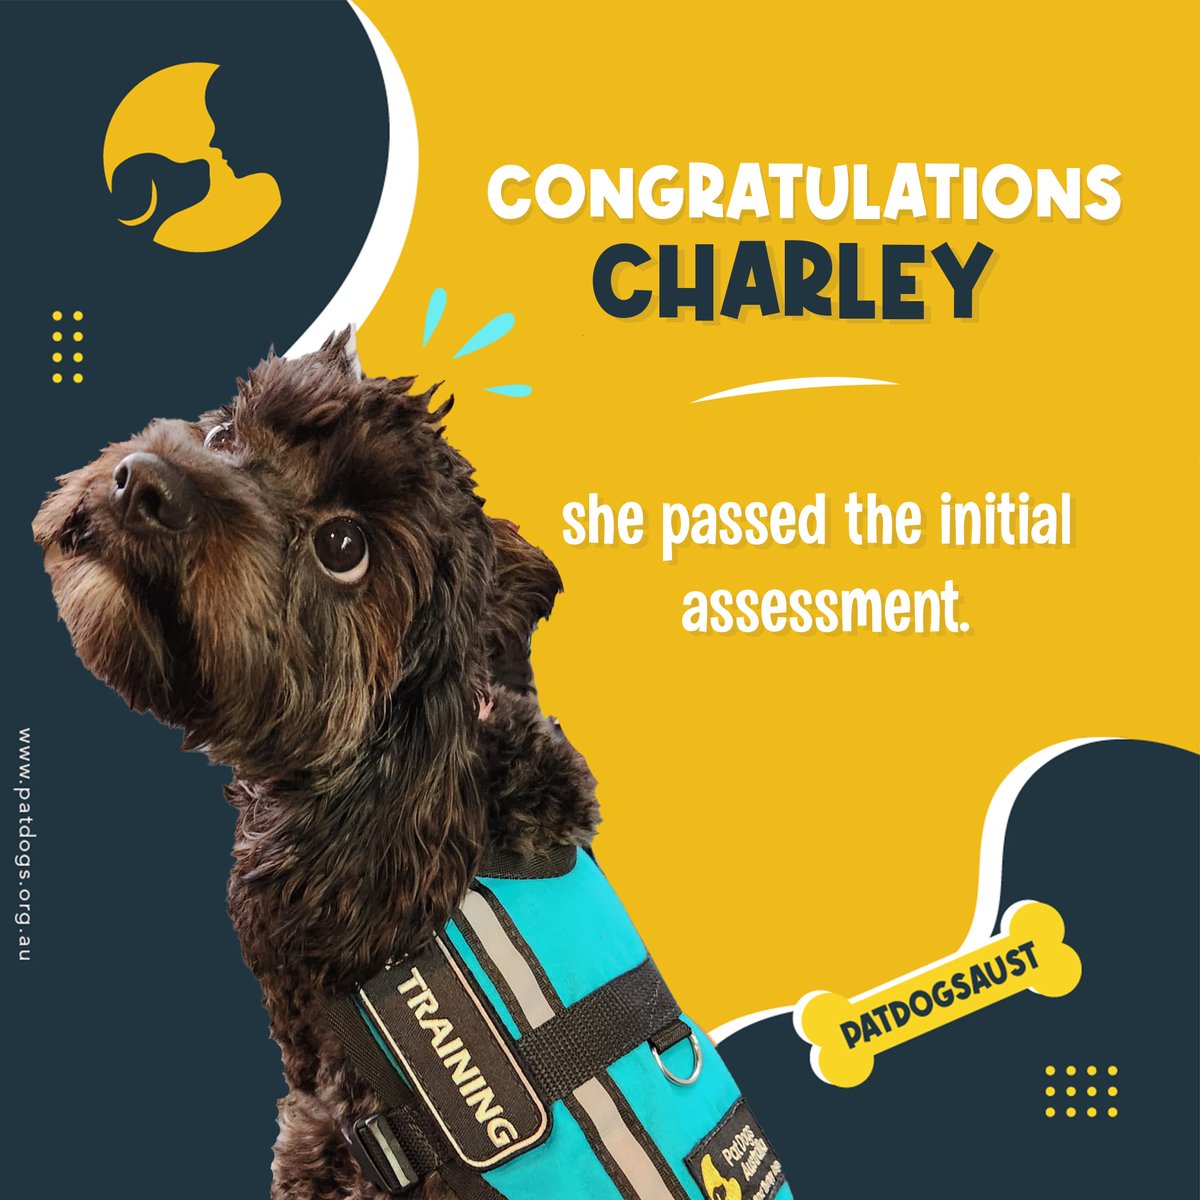 🎉 Big  congratulations to Charley! 🐾 She's aced her initial assessment on the  road to becoming an assistance dog. We're so proud of her progress and  can't wait to see all the amazing things she'll accomplish! 🌟 #assistancedogs #therapydog #iliketopatdogs